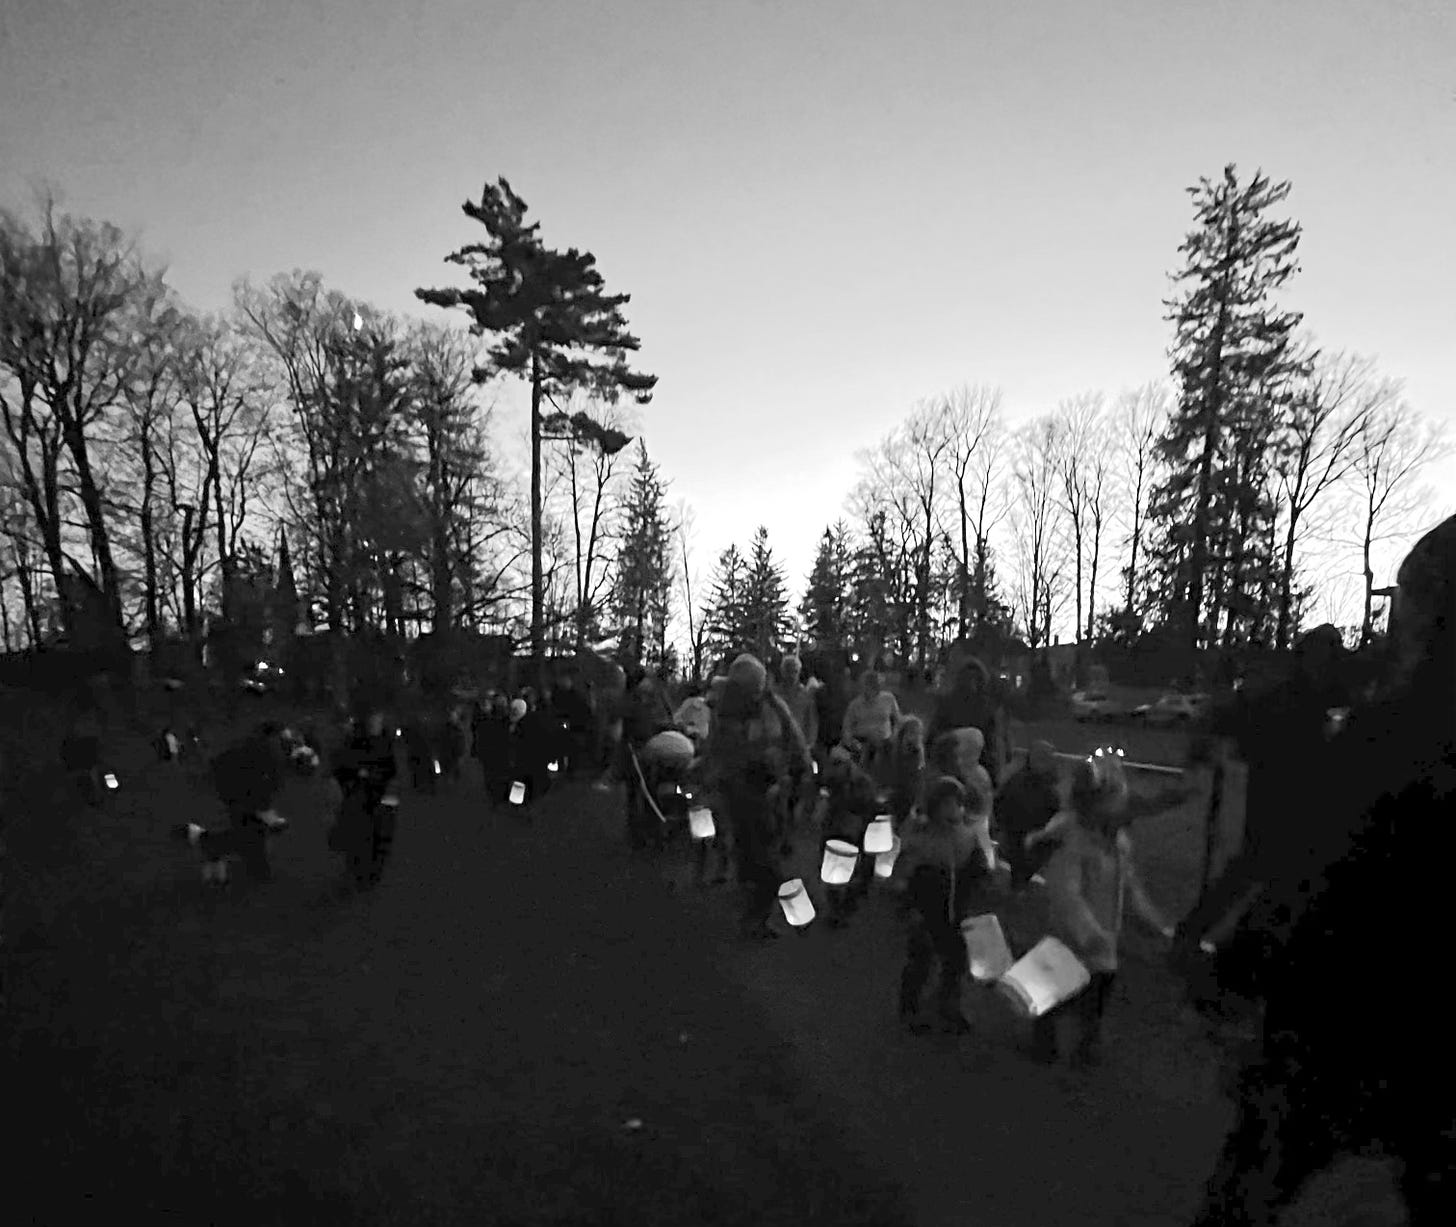 The photograph is grayscale and atmospheric. A parade of children carry paper lanterns at dusk, their shapes like shadows. Their lanterns, bright like fireflies, seem to float. Behind them, a line of trees stands against a darkening sky.